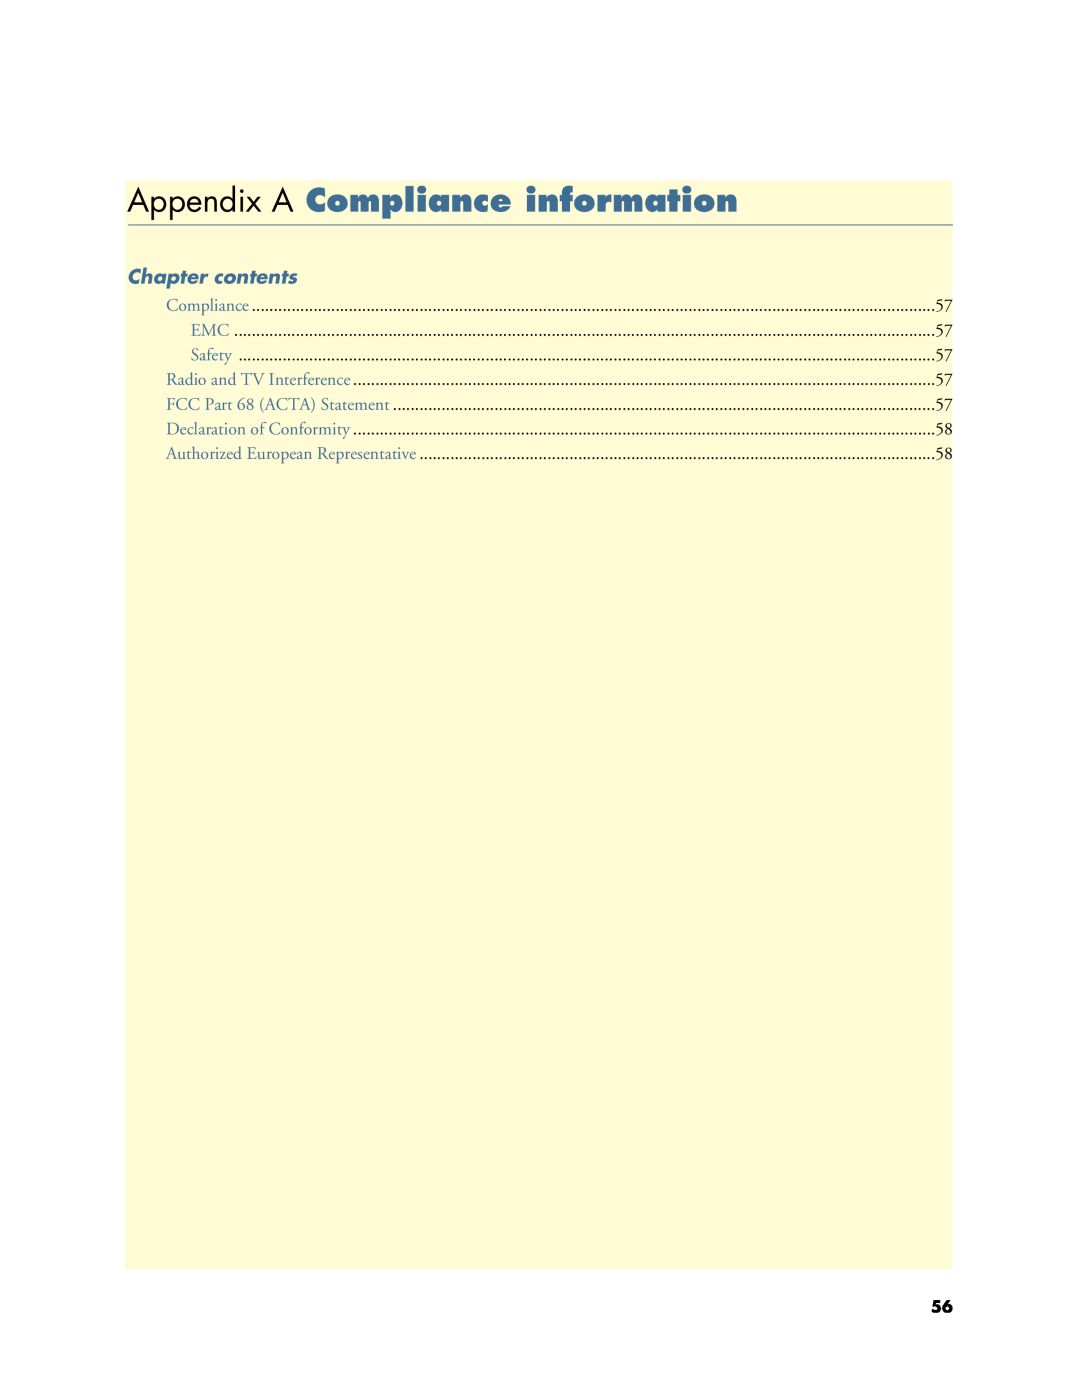 Patton electronic 07MOS10xx-GS, 1063 manual Appendix A Compliance information, Chapter contents 